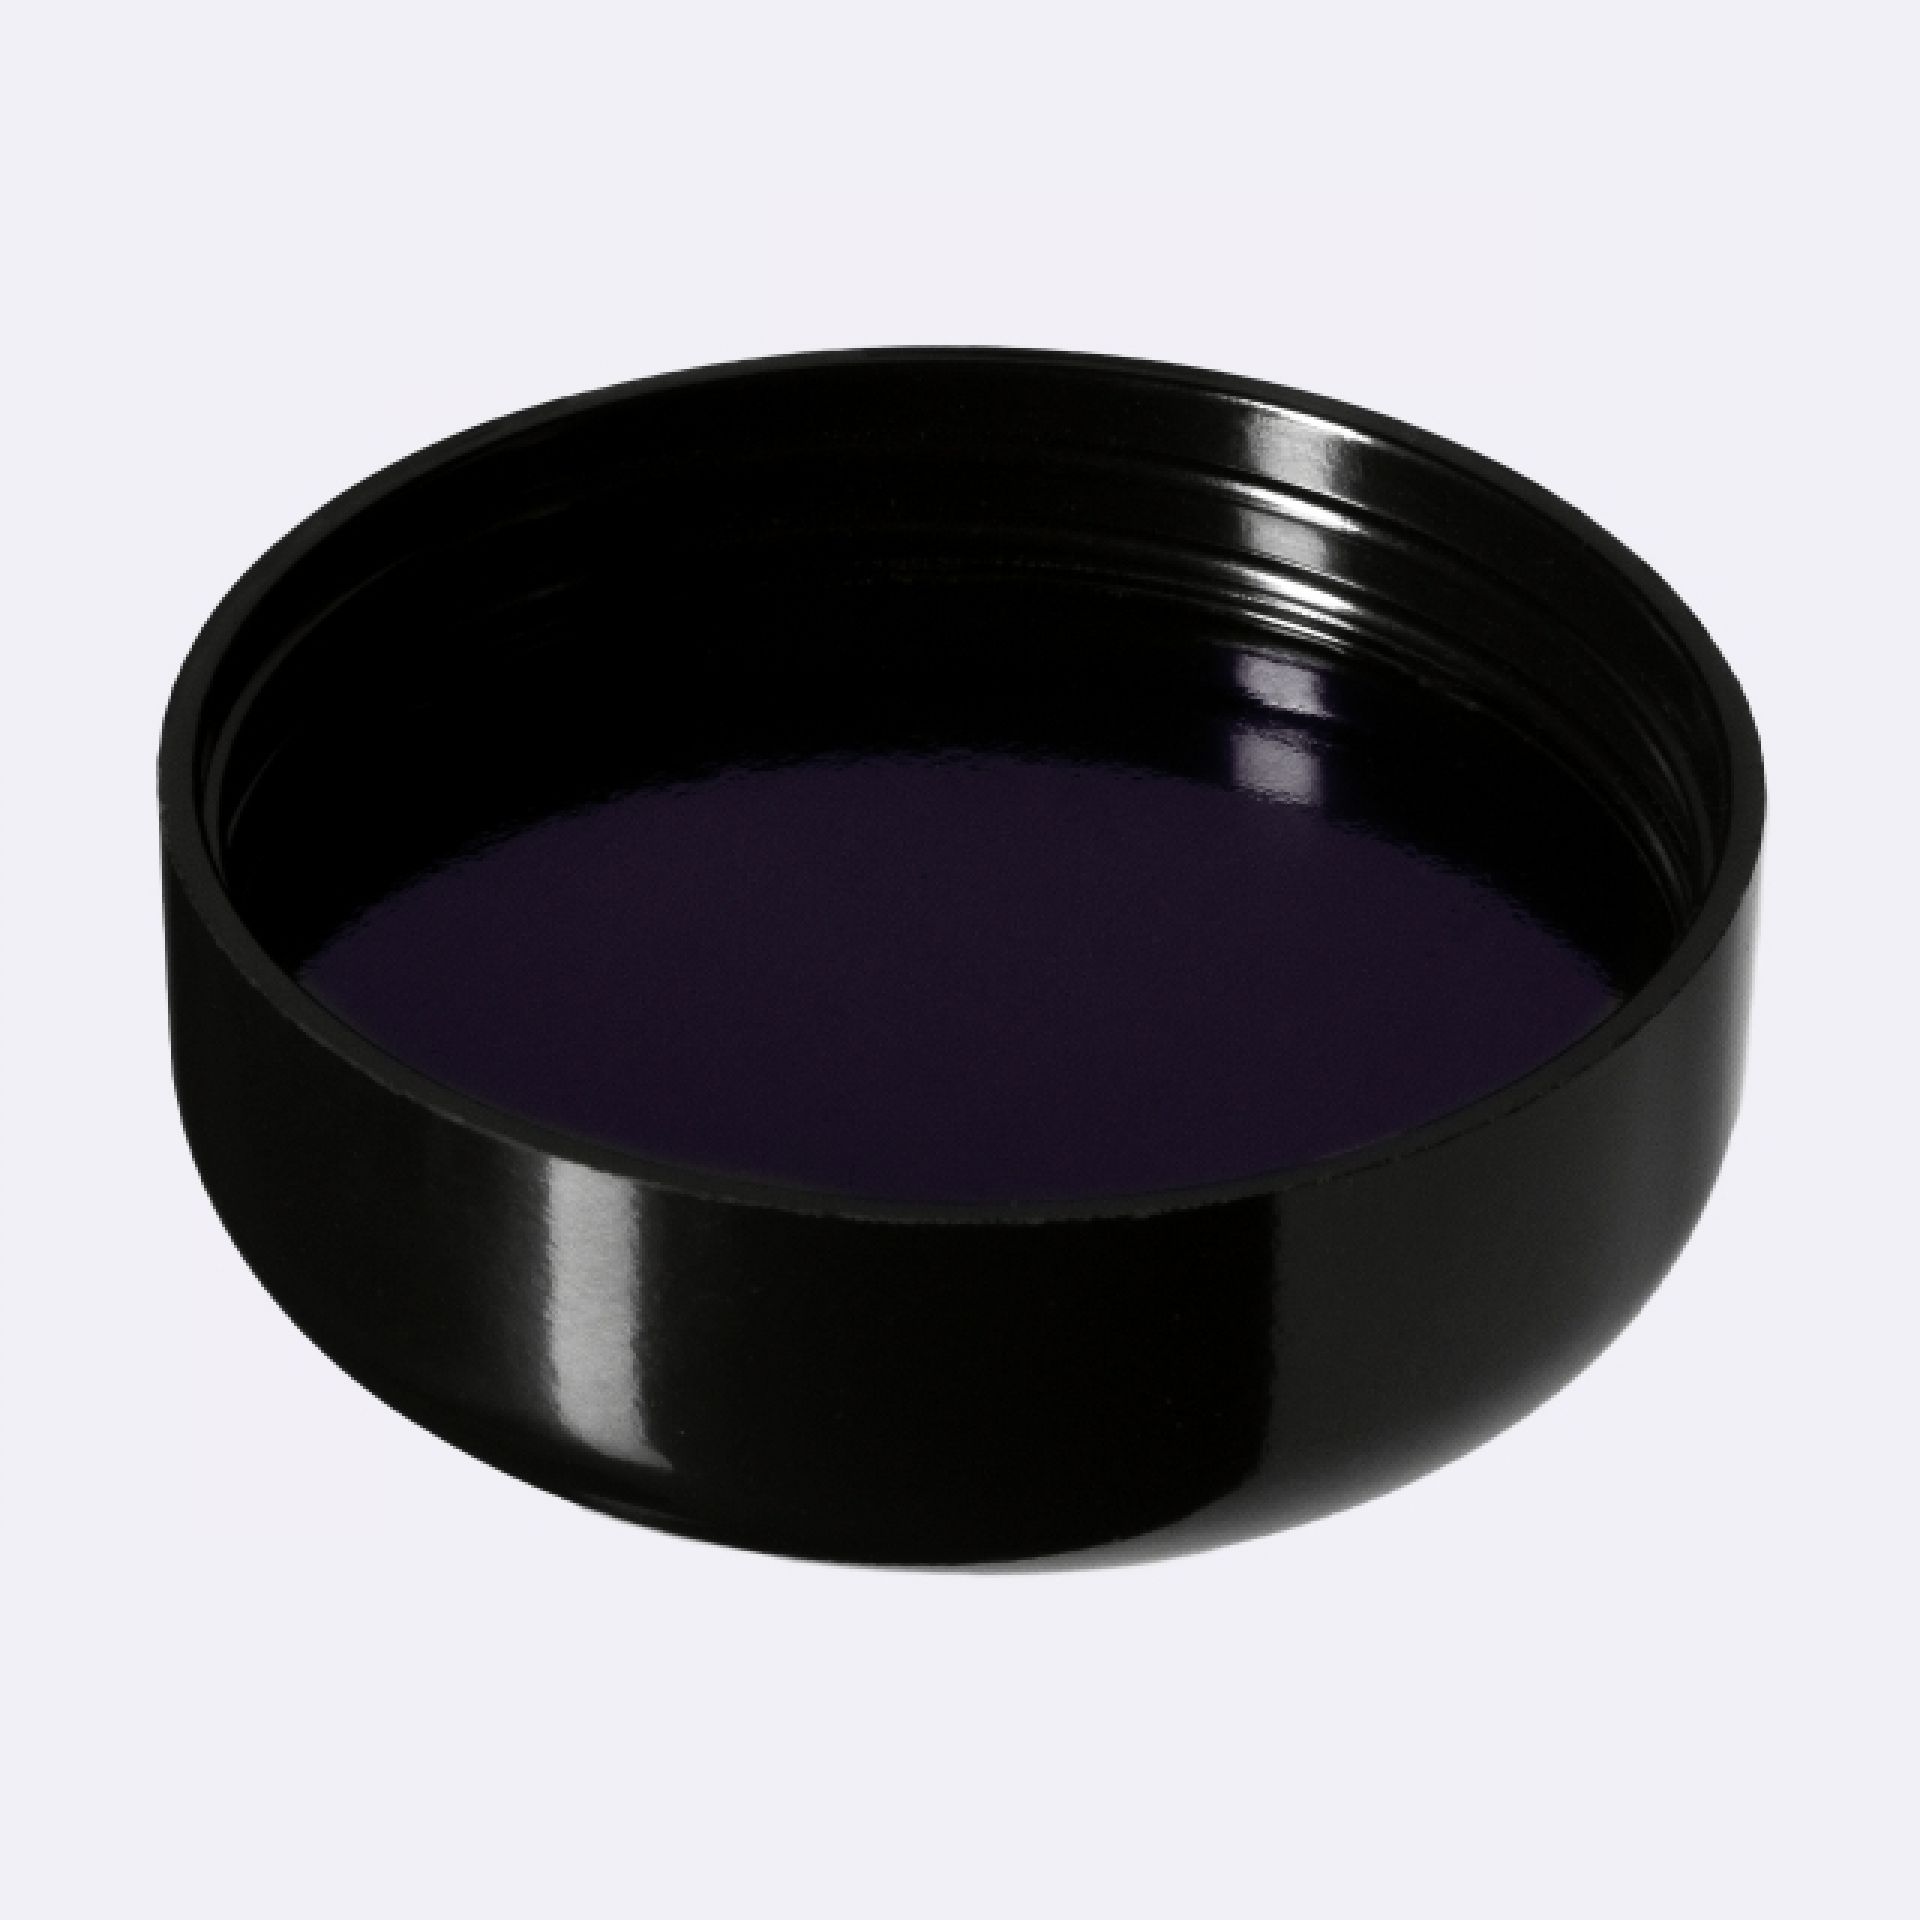 Lid Classic 58 special thread, UREA, black, glossy finish, violet Phan inlay (Ceres 100/Carina 500)